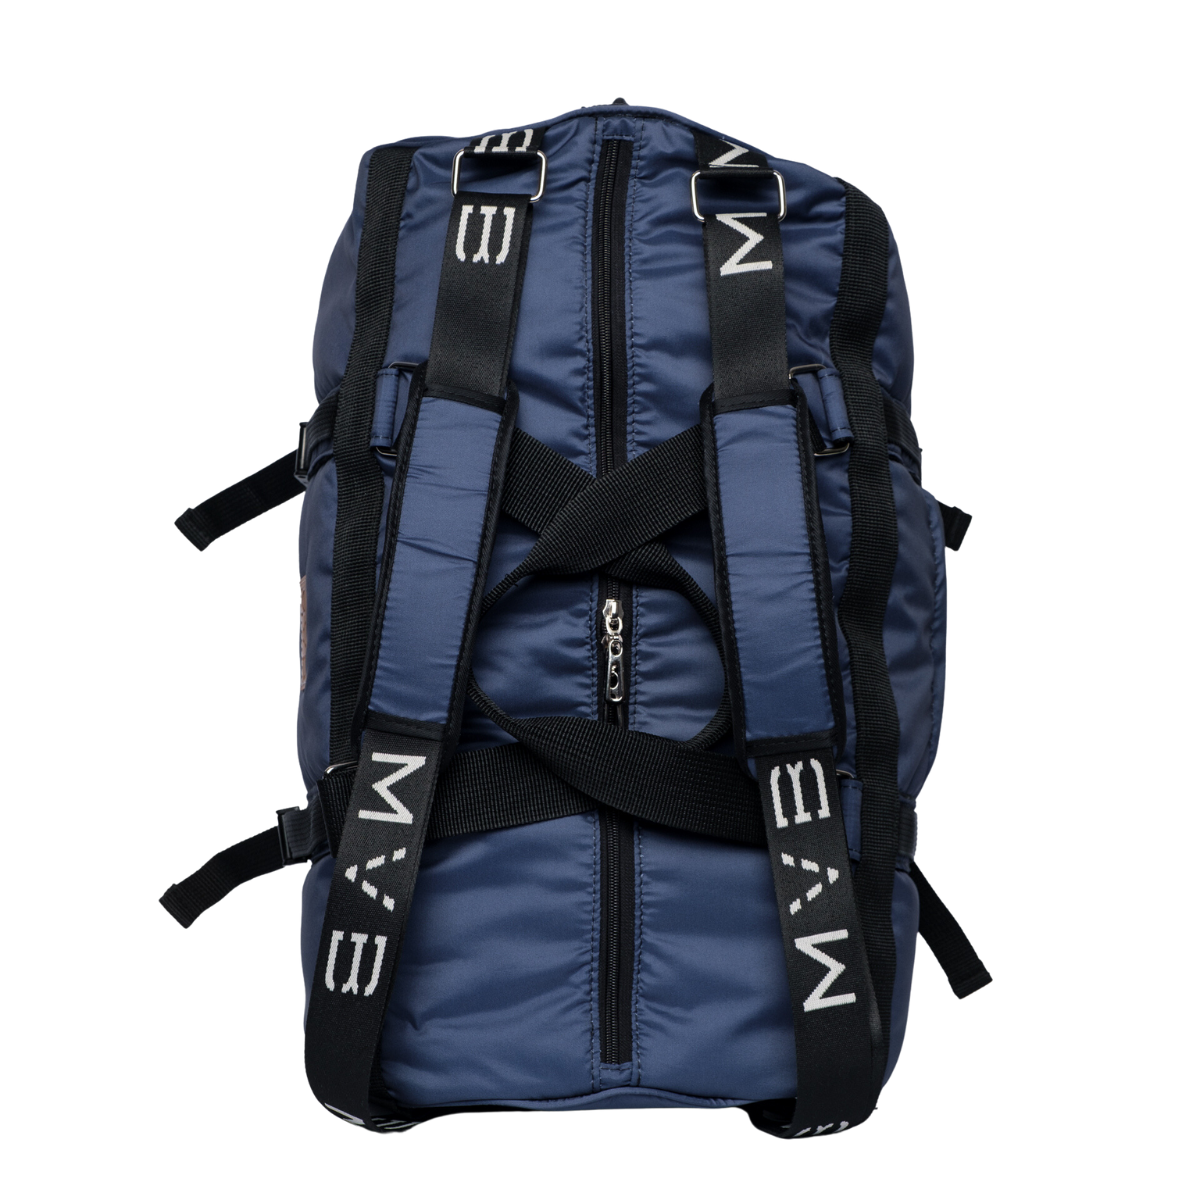 Sports vegan backpack made with ocean plastic